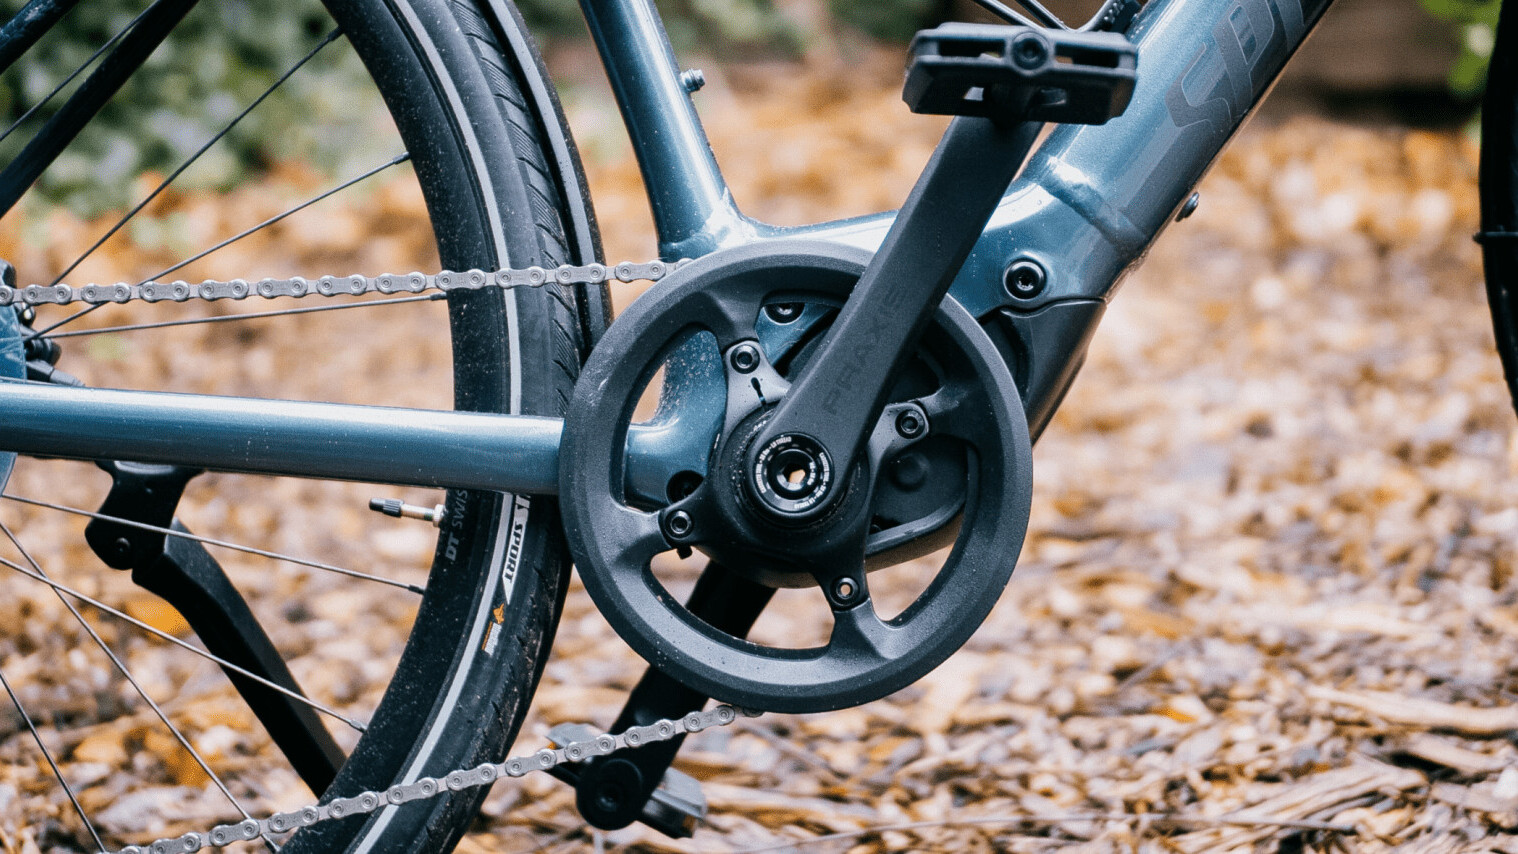 Buying an ebike? You should know about ‘torque’ and ‘cadence’ sensors